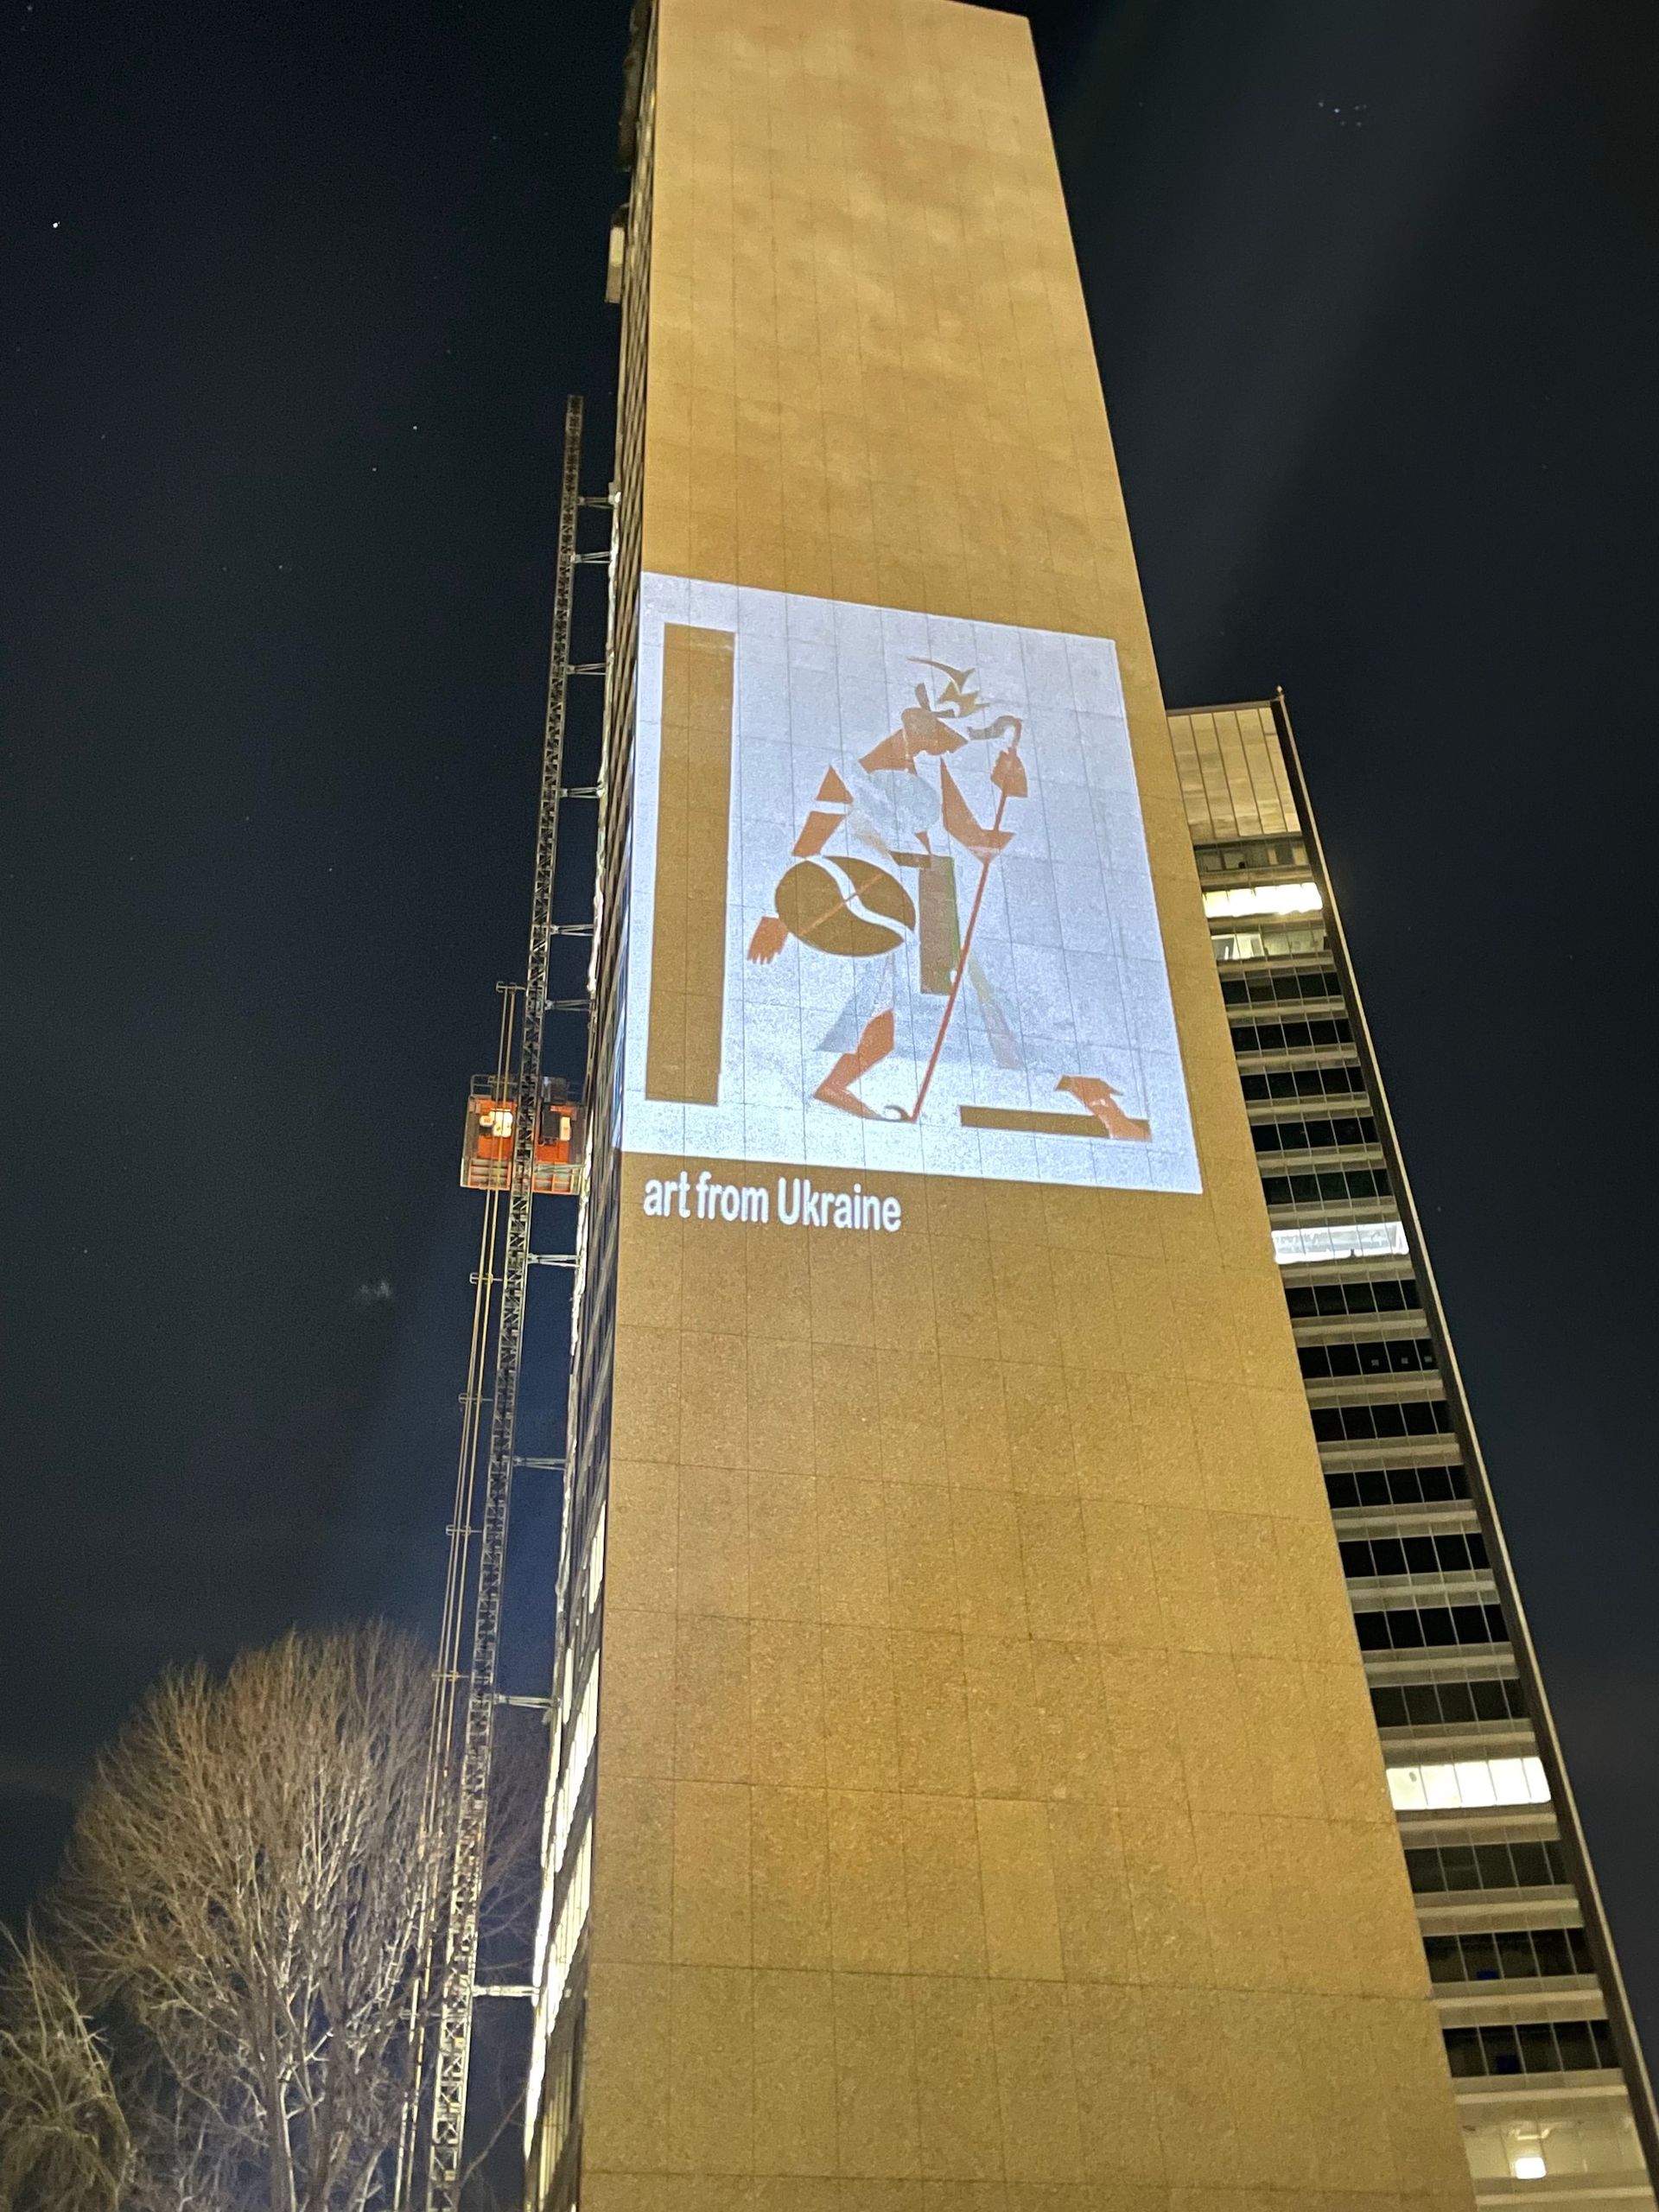 A Justice Murals projection in Oakland featuring a work by Anatol Petrytsky Courtesy Justice Murals